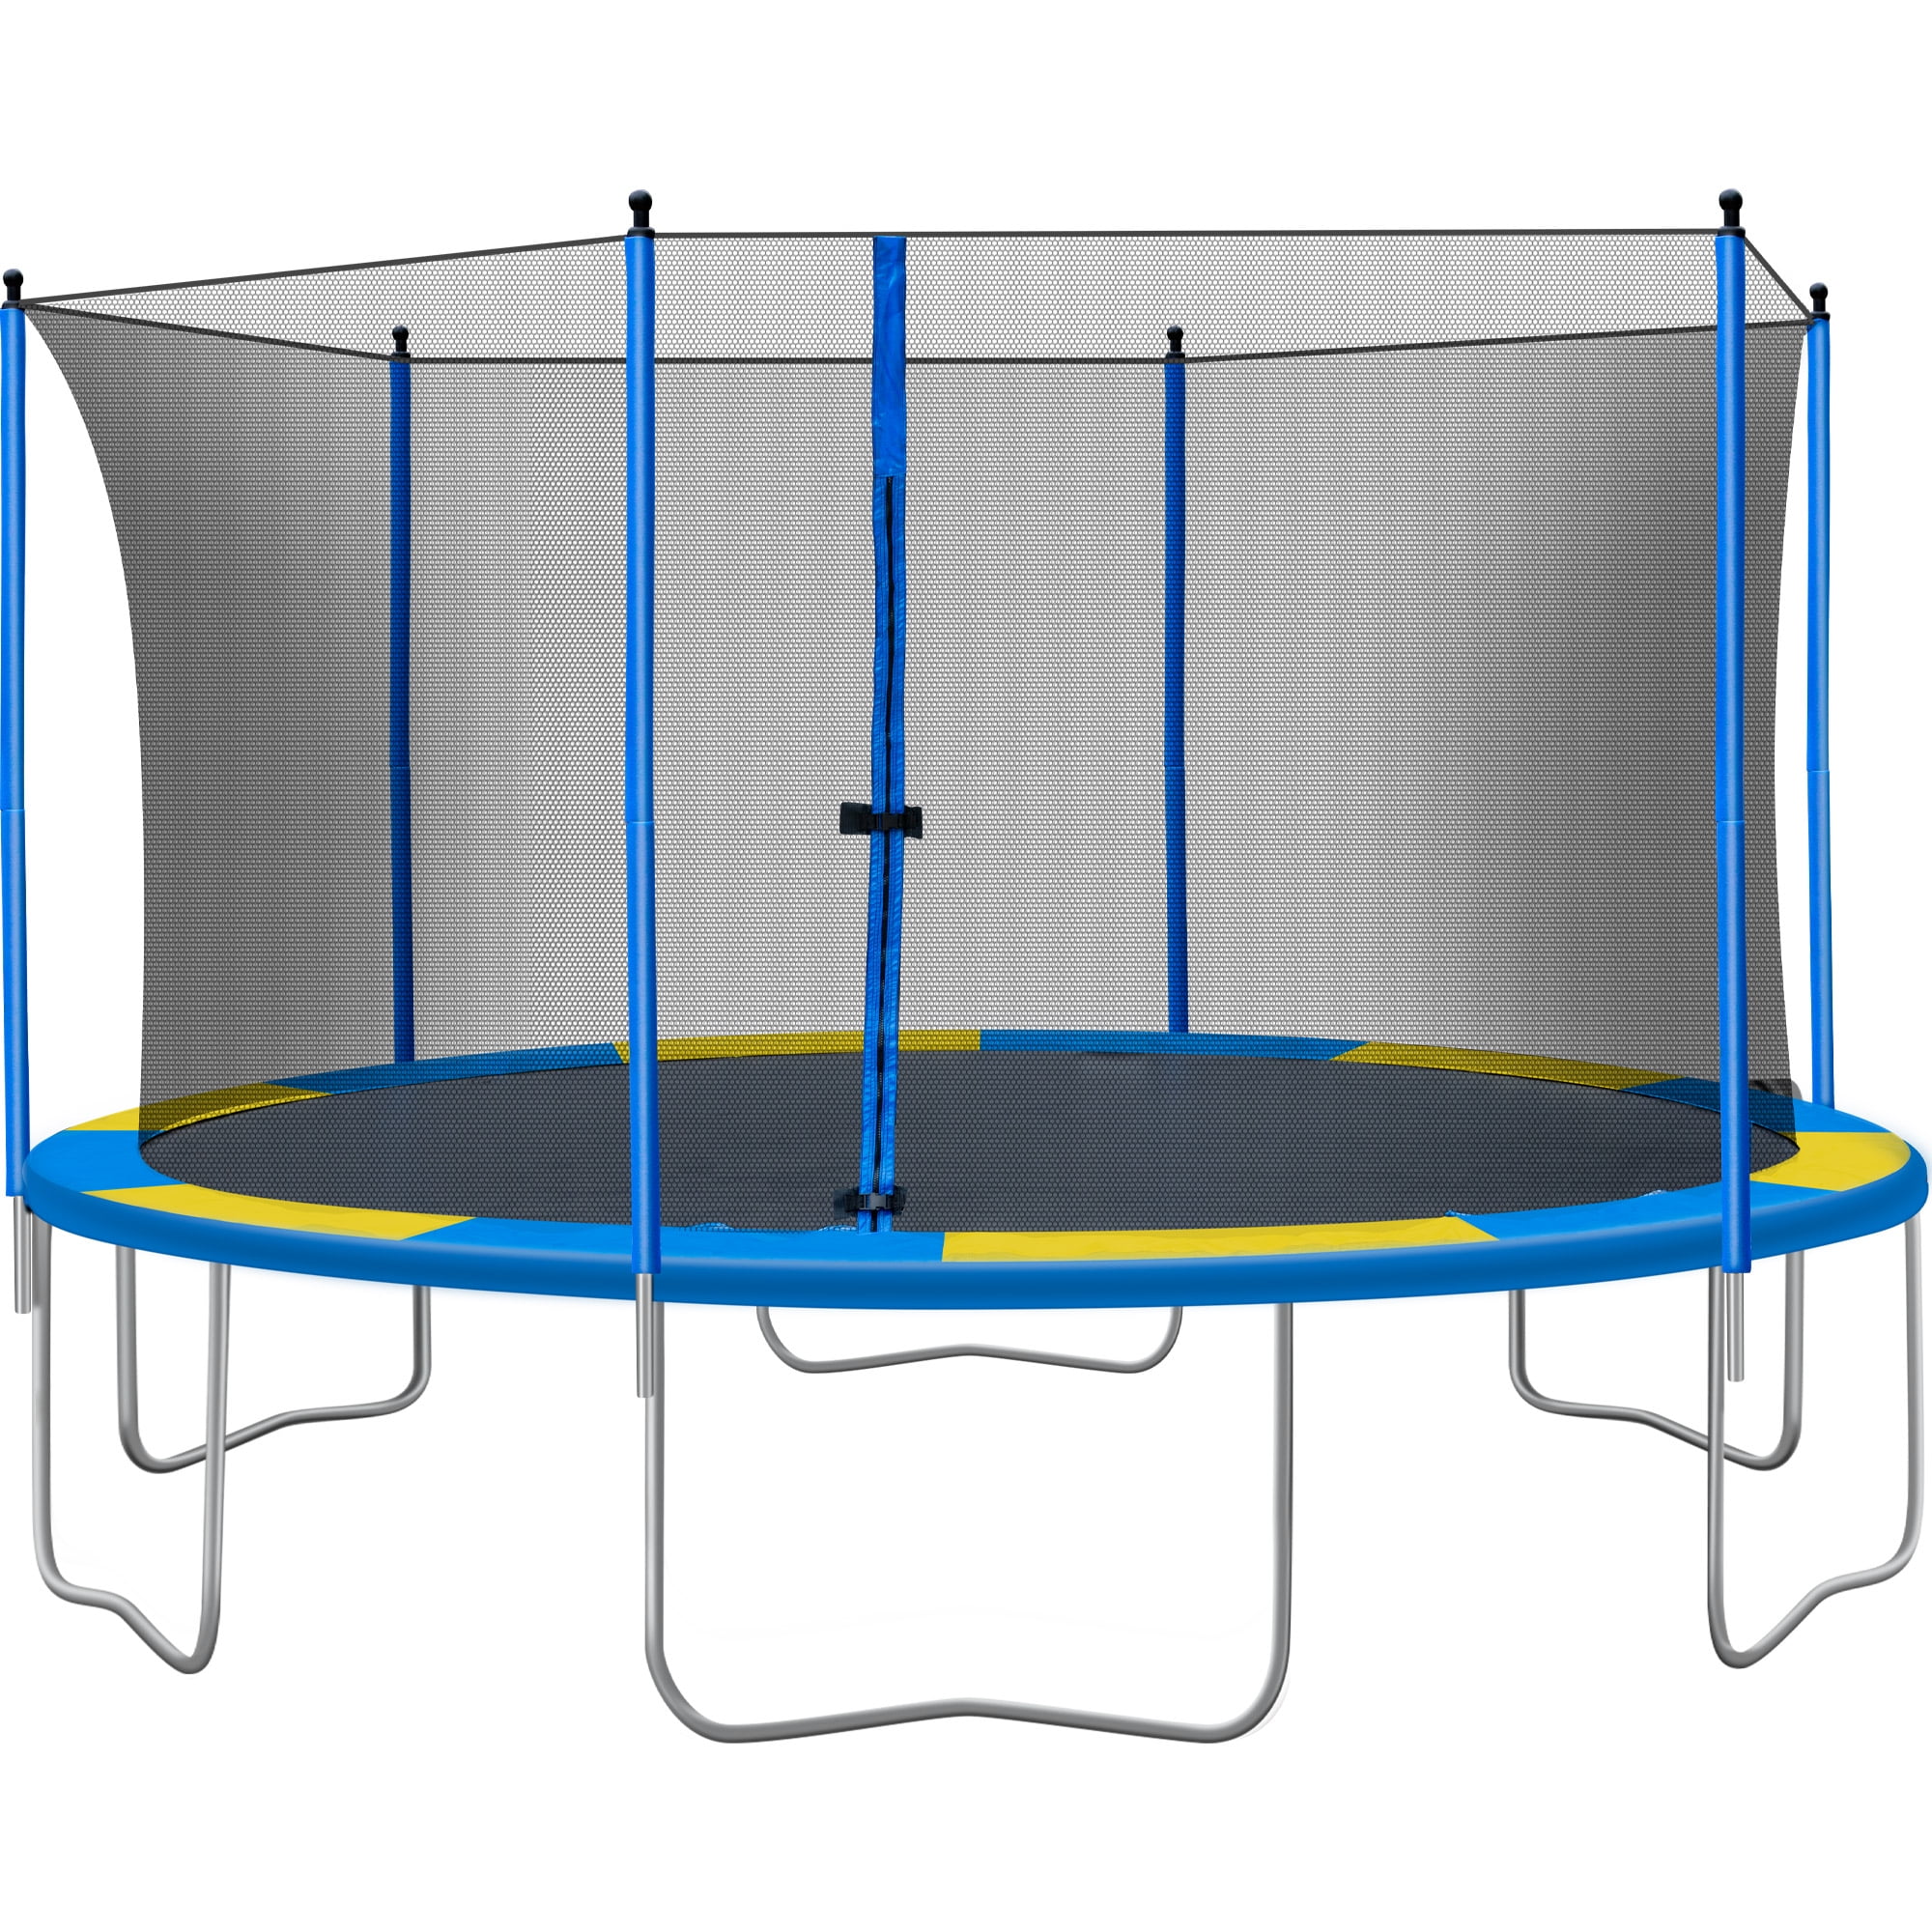 SAQIMA 10 FT Kids Trampoline with Enclosure Net and Spring Cover Padding Outdoor Trampoline Fun Summer Exercise Trampoline for Kids Adults Indoor/Garden Workout Max Load 500lbs 